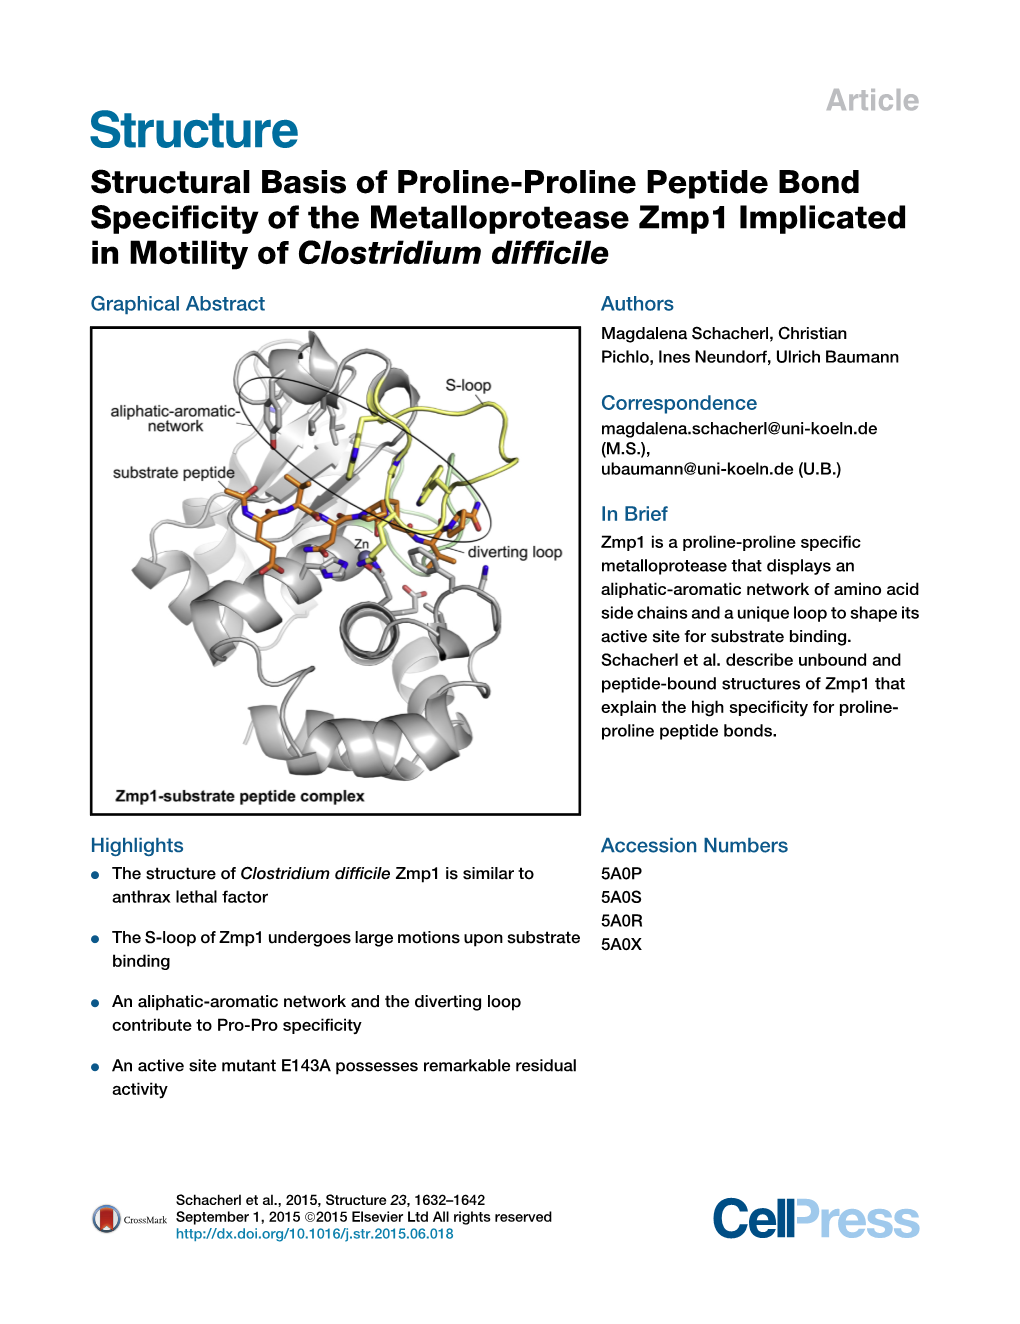 Structural Basis of Proline-Proline Peptide Bond Specificity of the Metalloprotease Zmp1 Implicated in Motility of Clostridium D